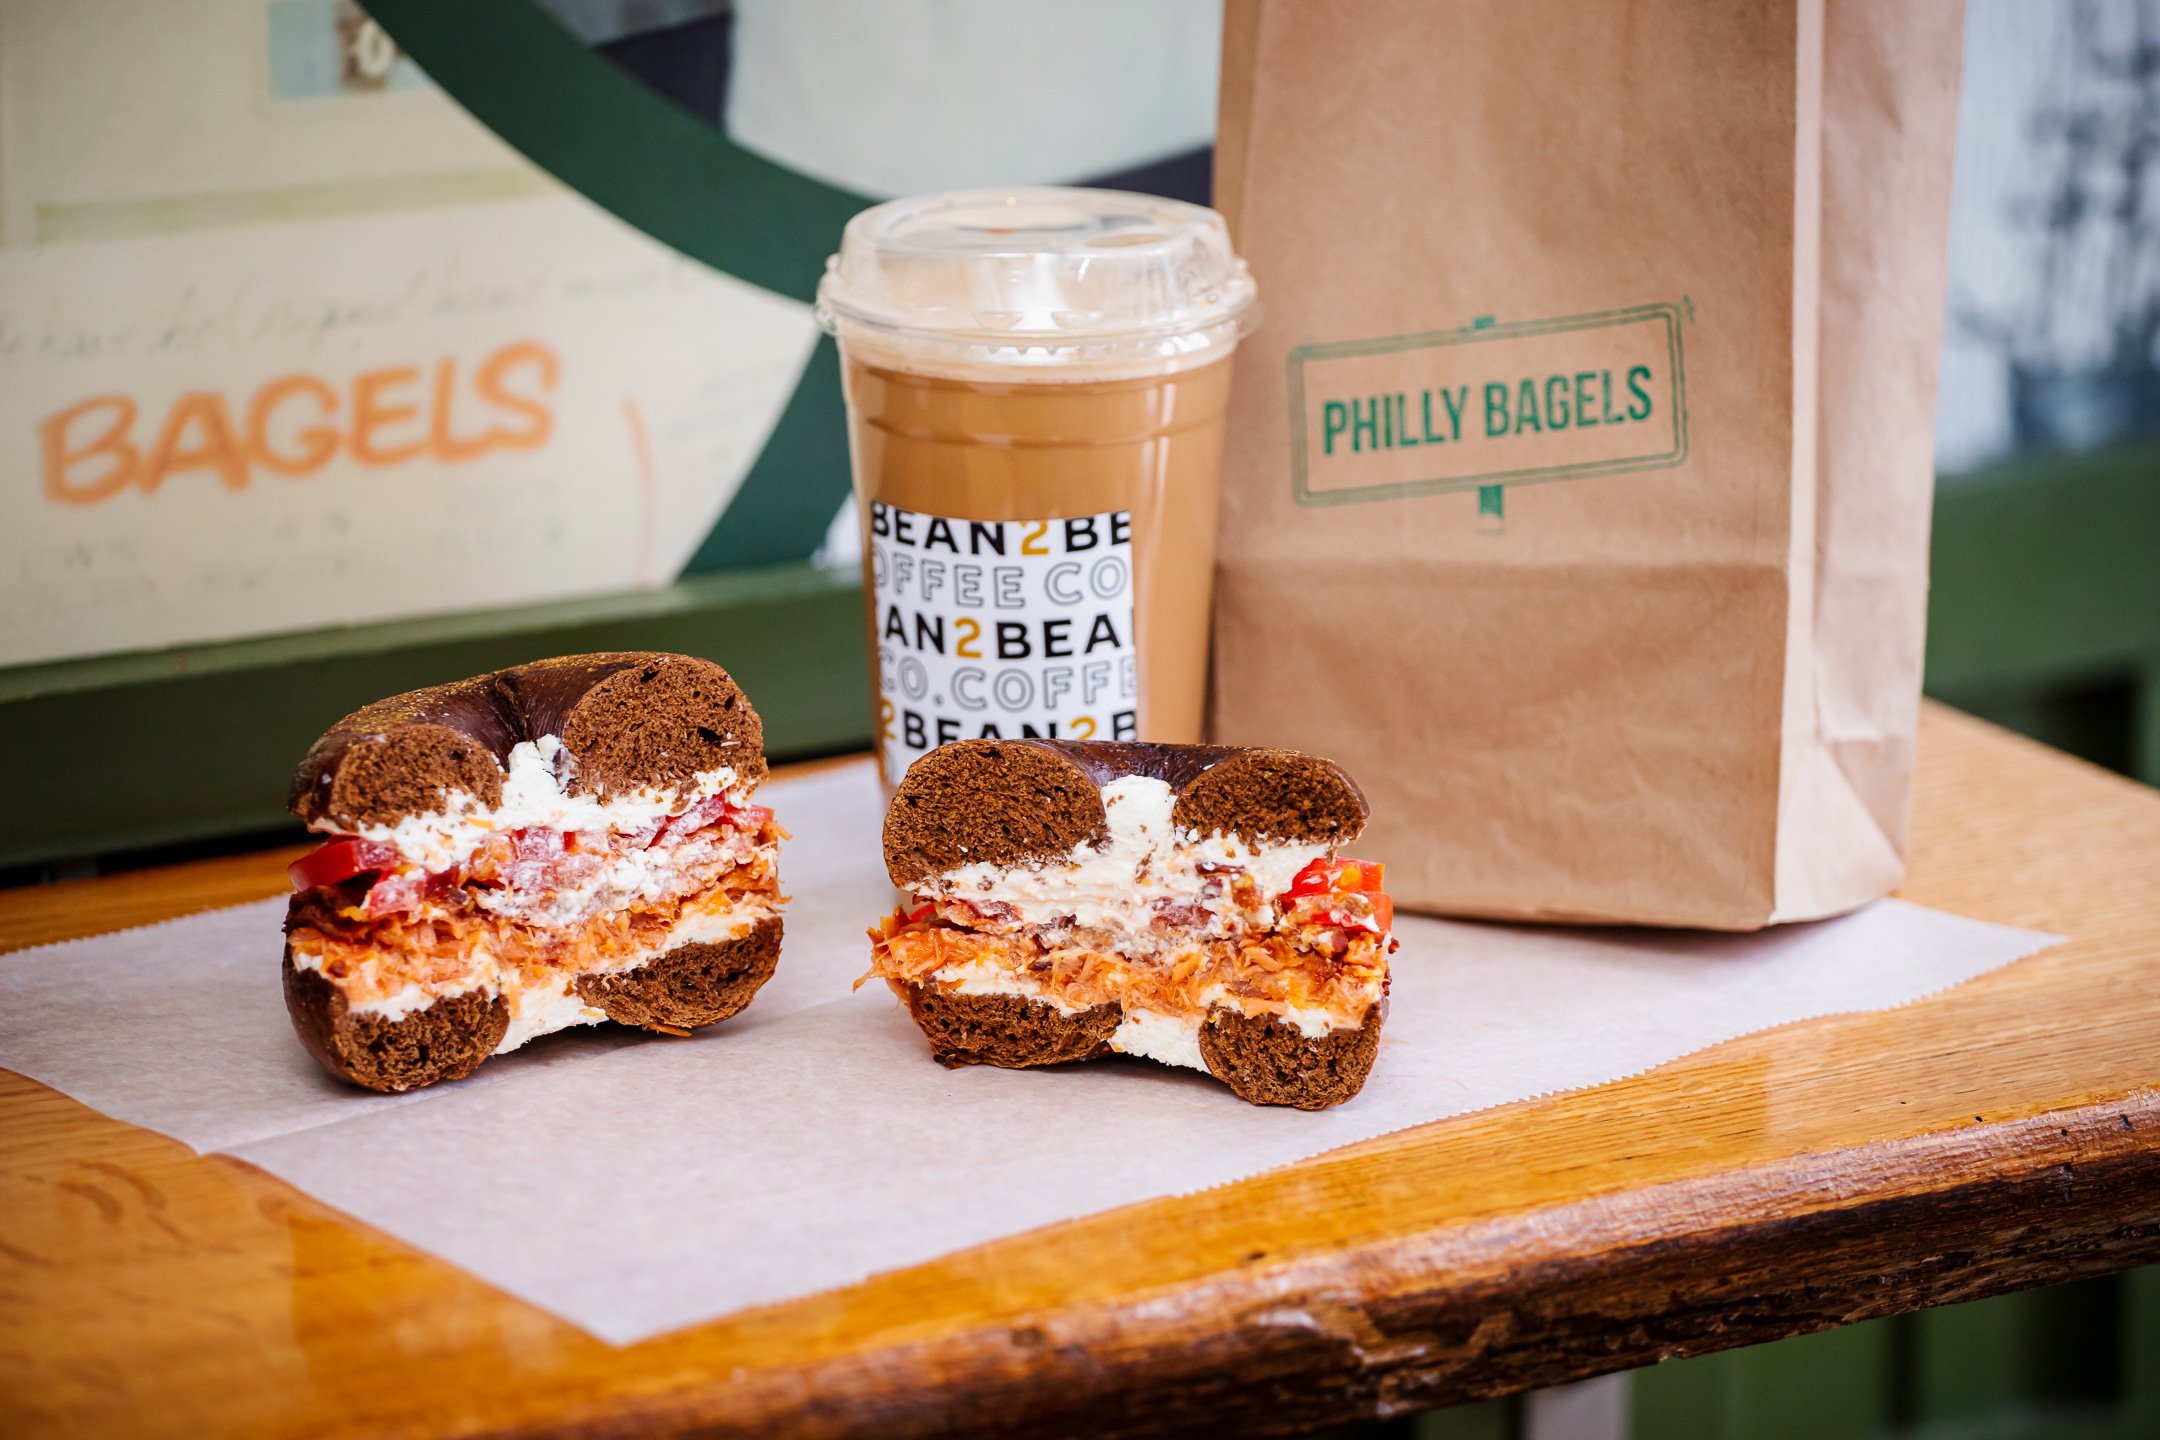 Philly_Bagels_Fitzwater_St-Bean2Bean_Coffee_Co-Philadelphia